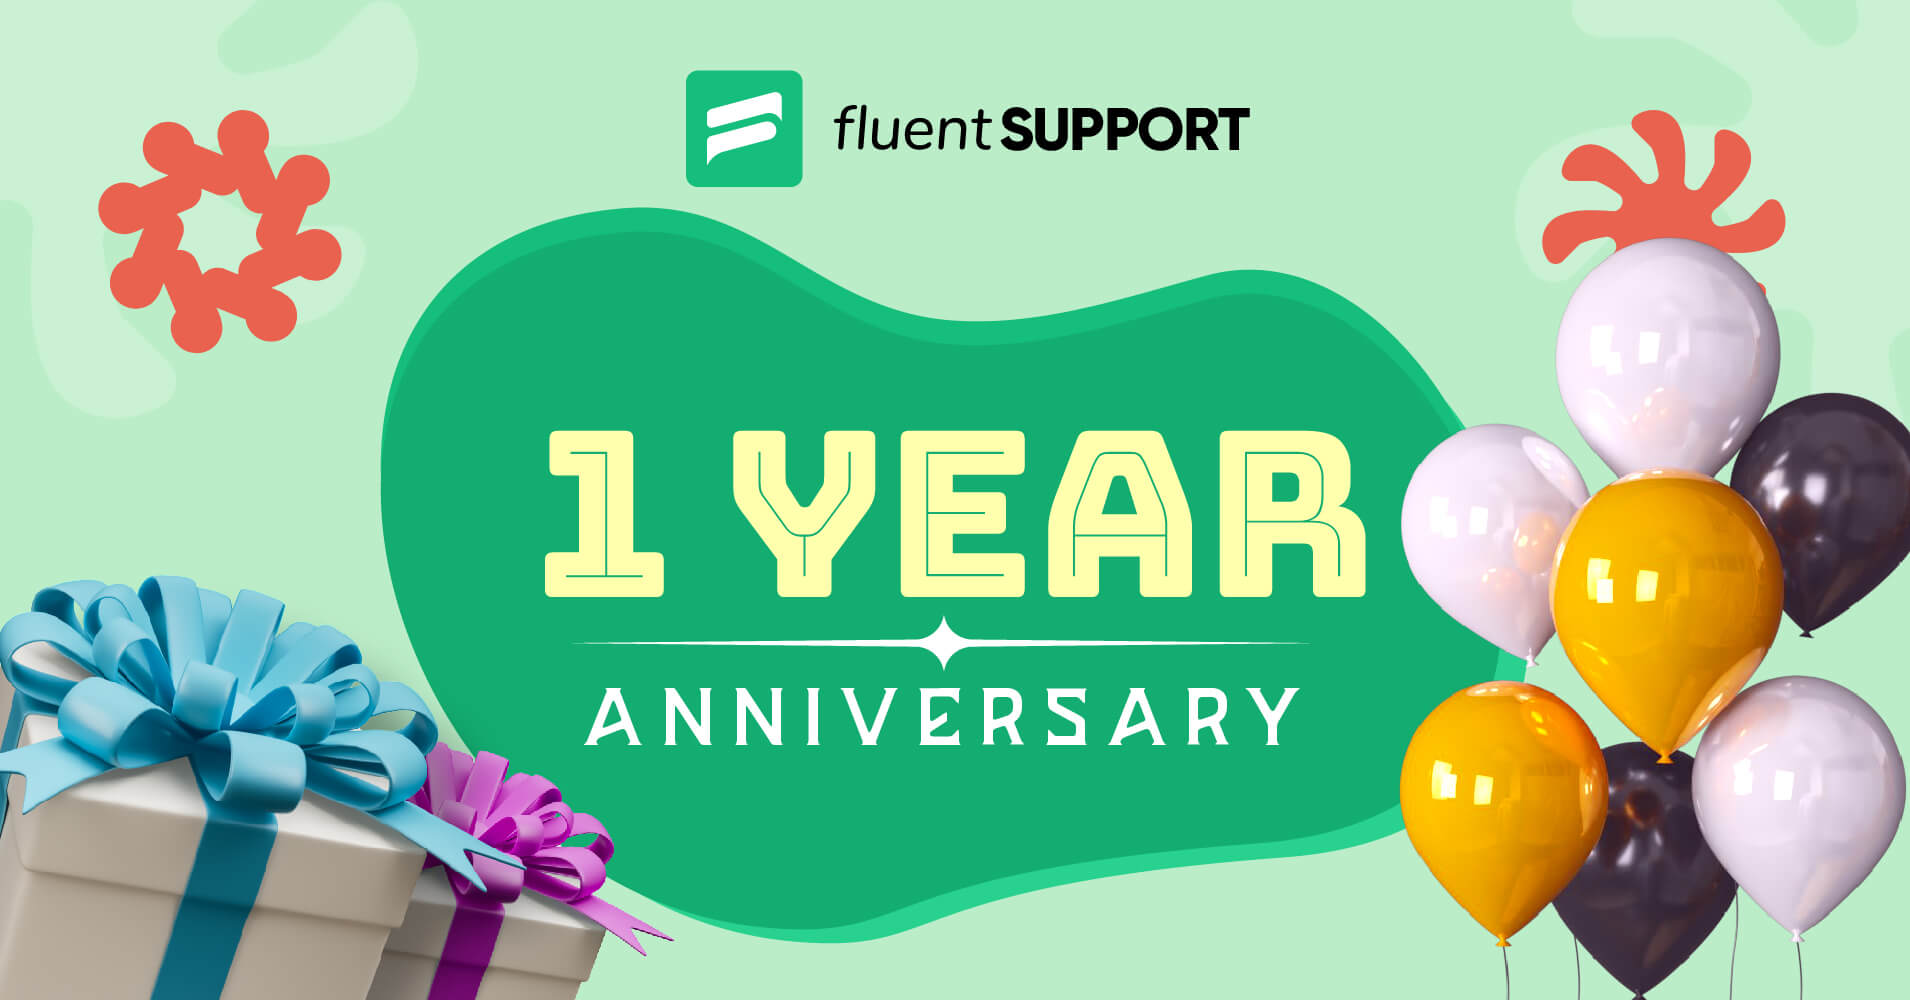 Celebrating the 1st year of Fluent Support